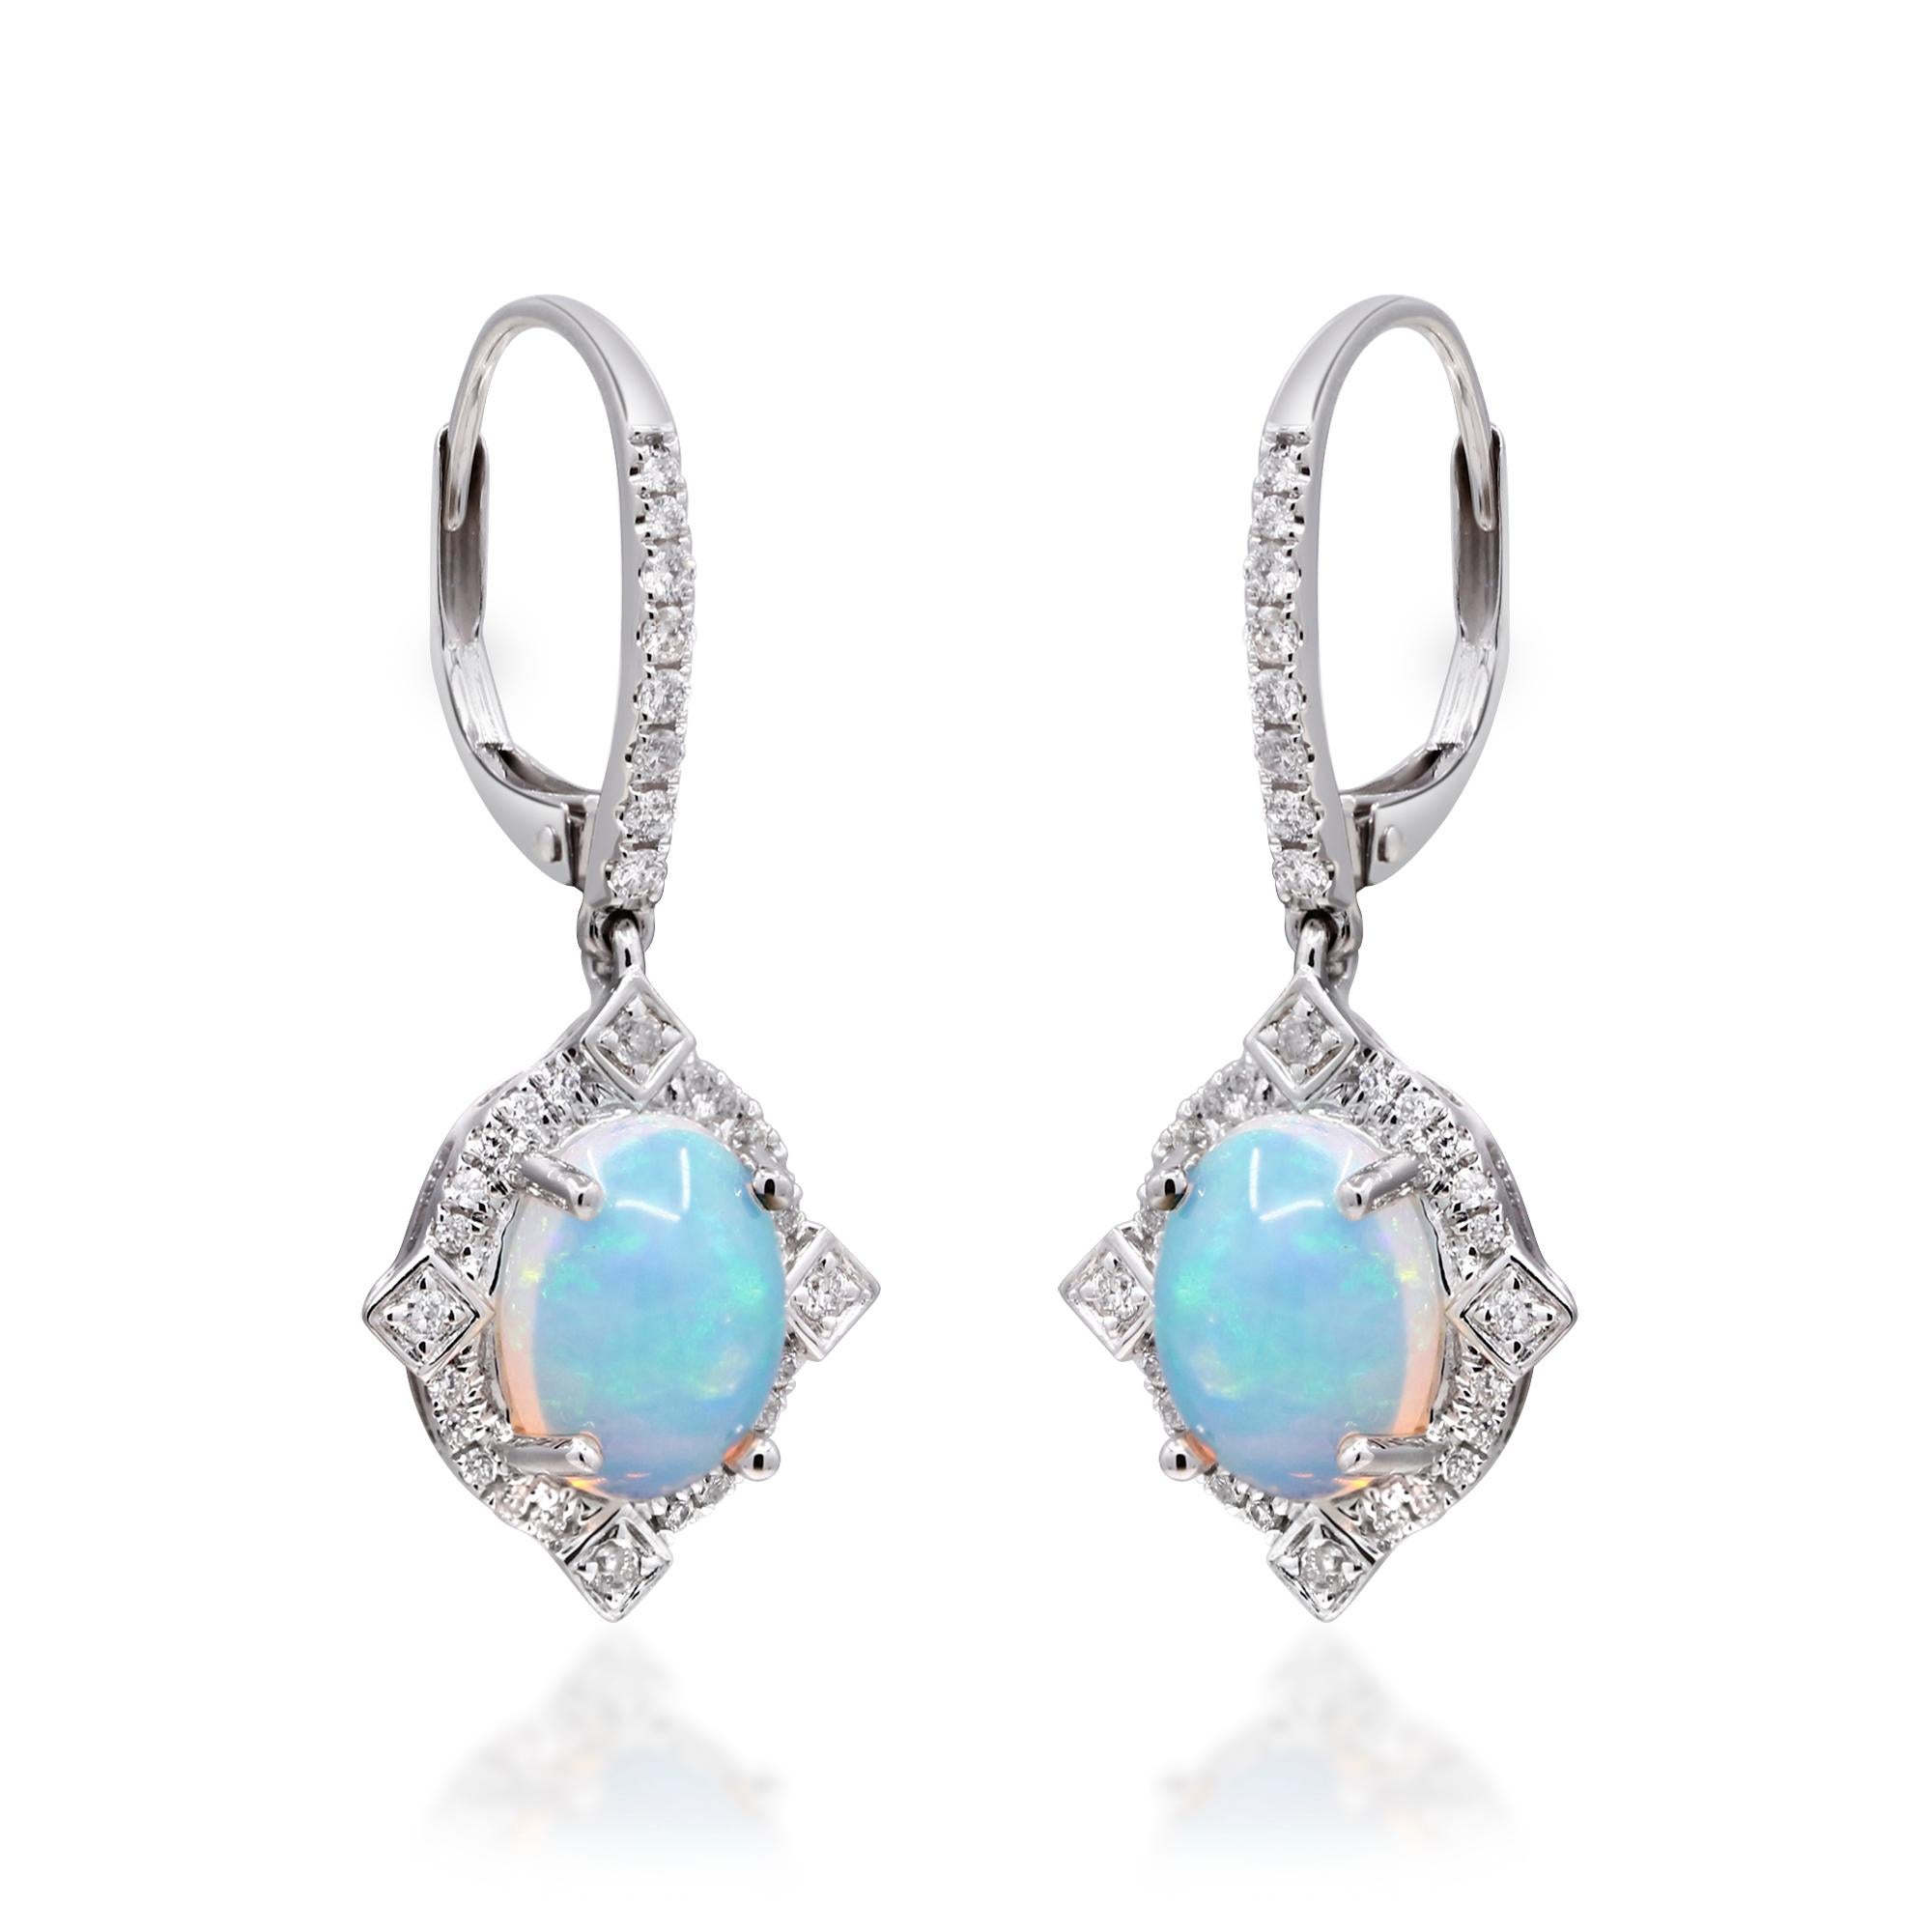 Decorate yourself in elegance with this Earring is crafted from 10-karat White Gold by Gin & Grace Earring. This Earring is made up of 9x7 mm Oval - Cab (2pcs) 2.68 carat Ethiopian Opal and Round-cut White Diamond (64 Pcs) 0.36 Carat. This Earring